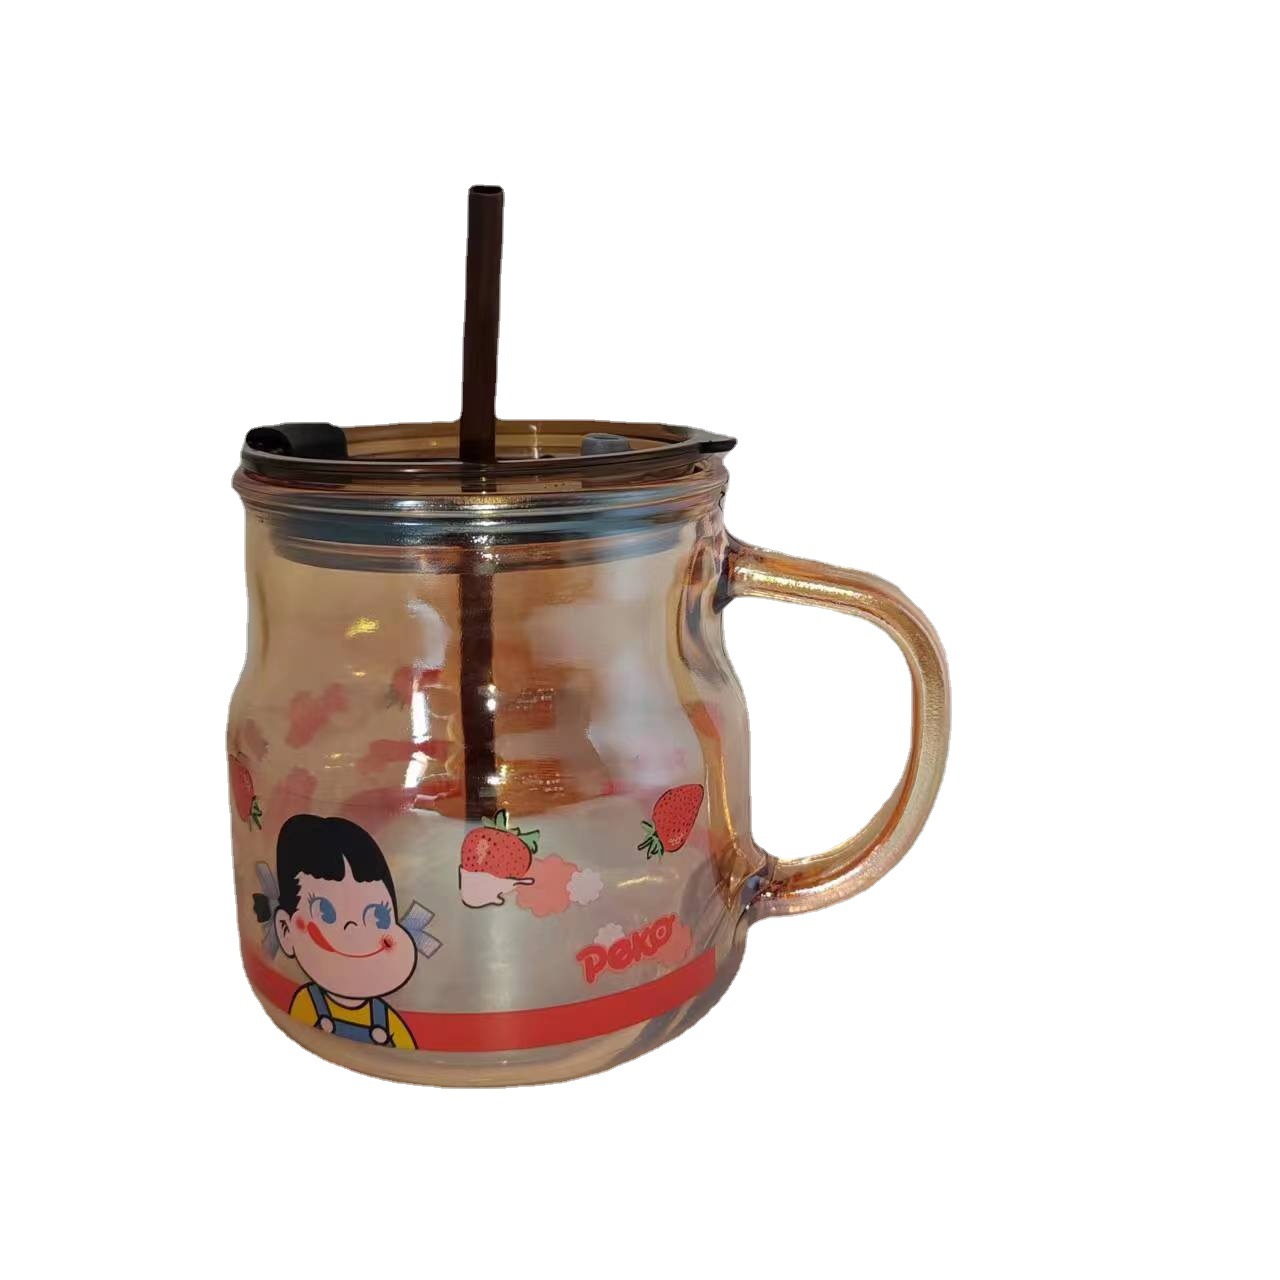 Ws Internet Celebrity Tiktok High-Looking Pier Cup Large-Capacity Water Cup Coffee Cup Ins Style Cup with Straw Handle Glass